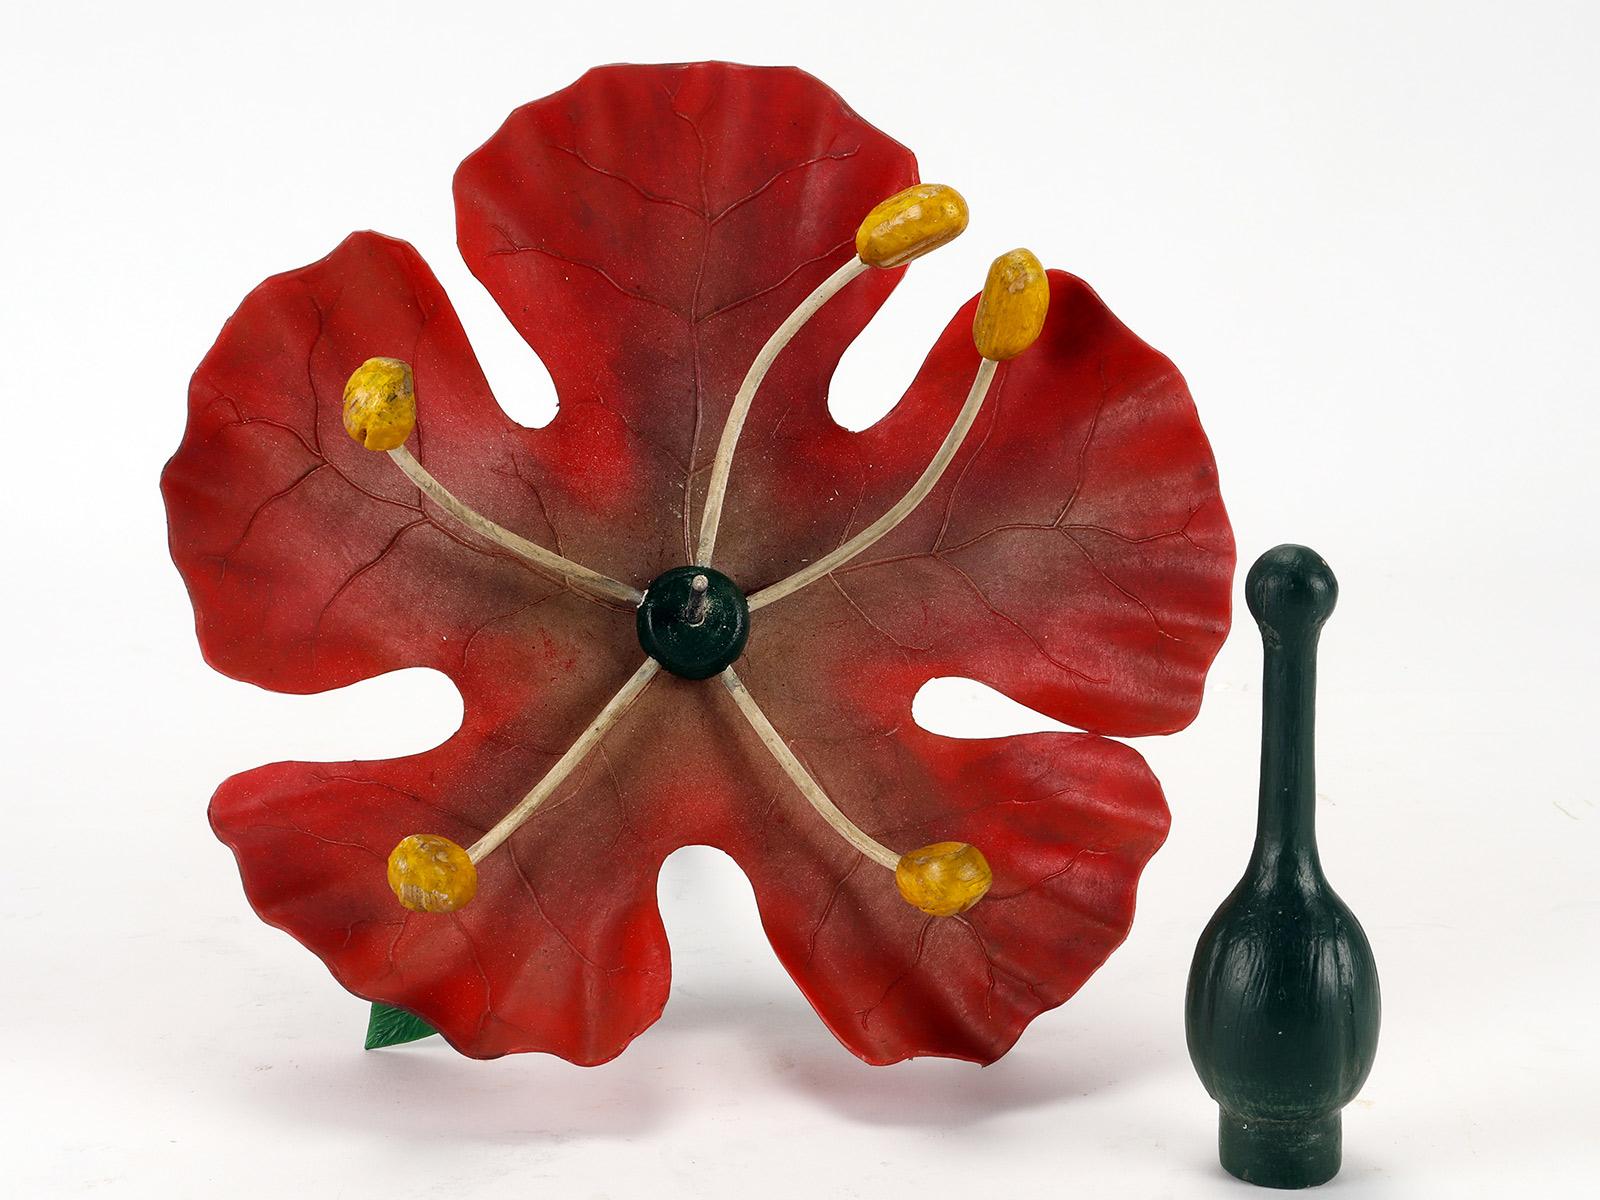 Metal Botanic Model of a Red Grape Flower, Paravia, Italy, 1940 For Sale